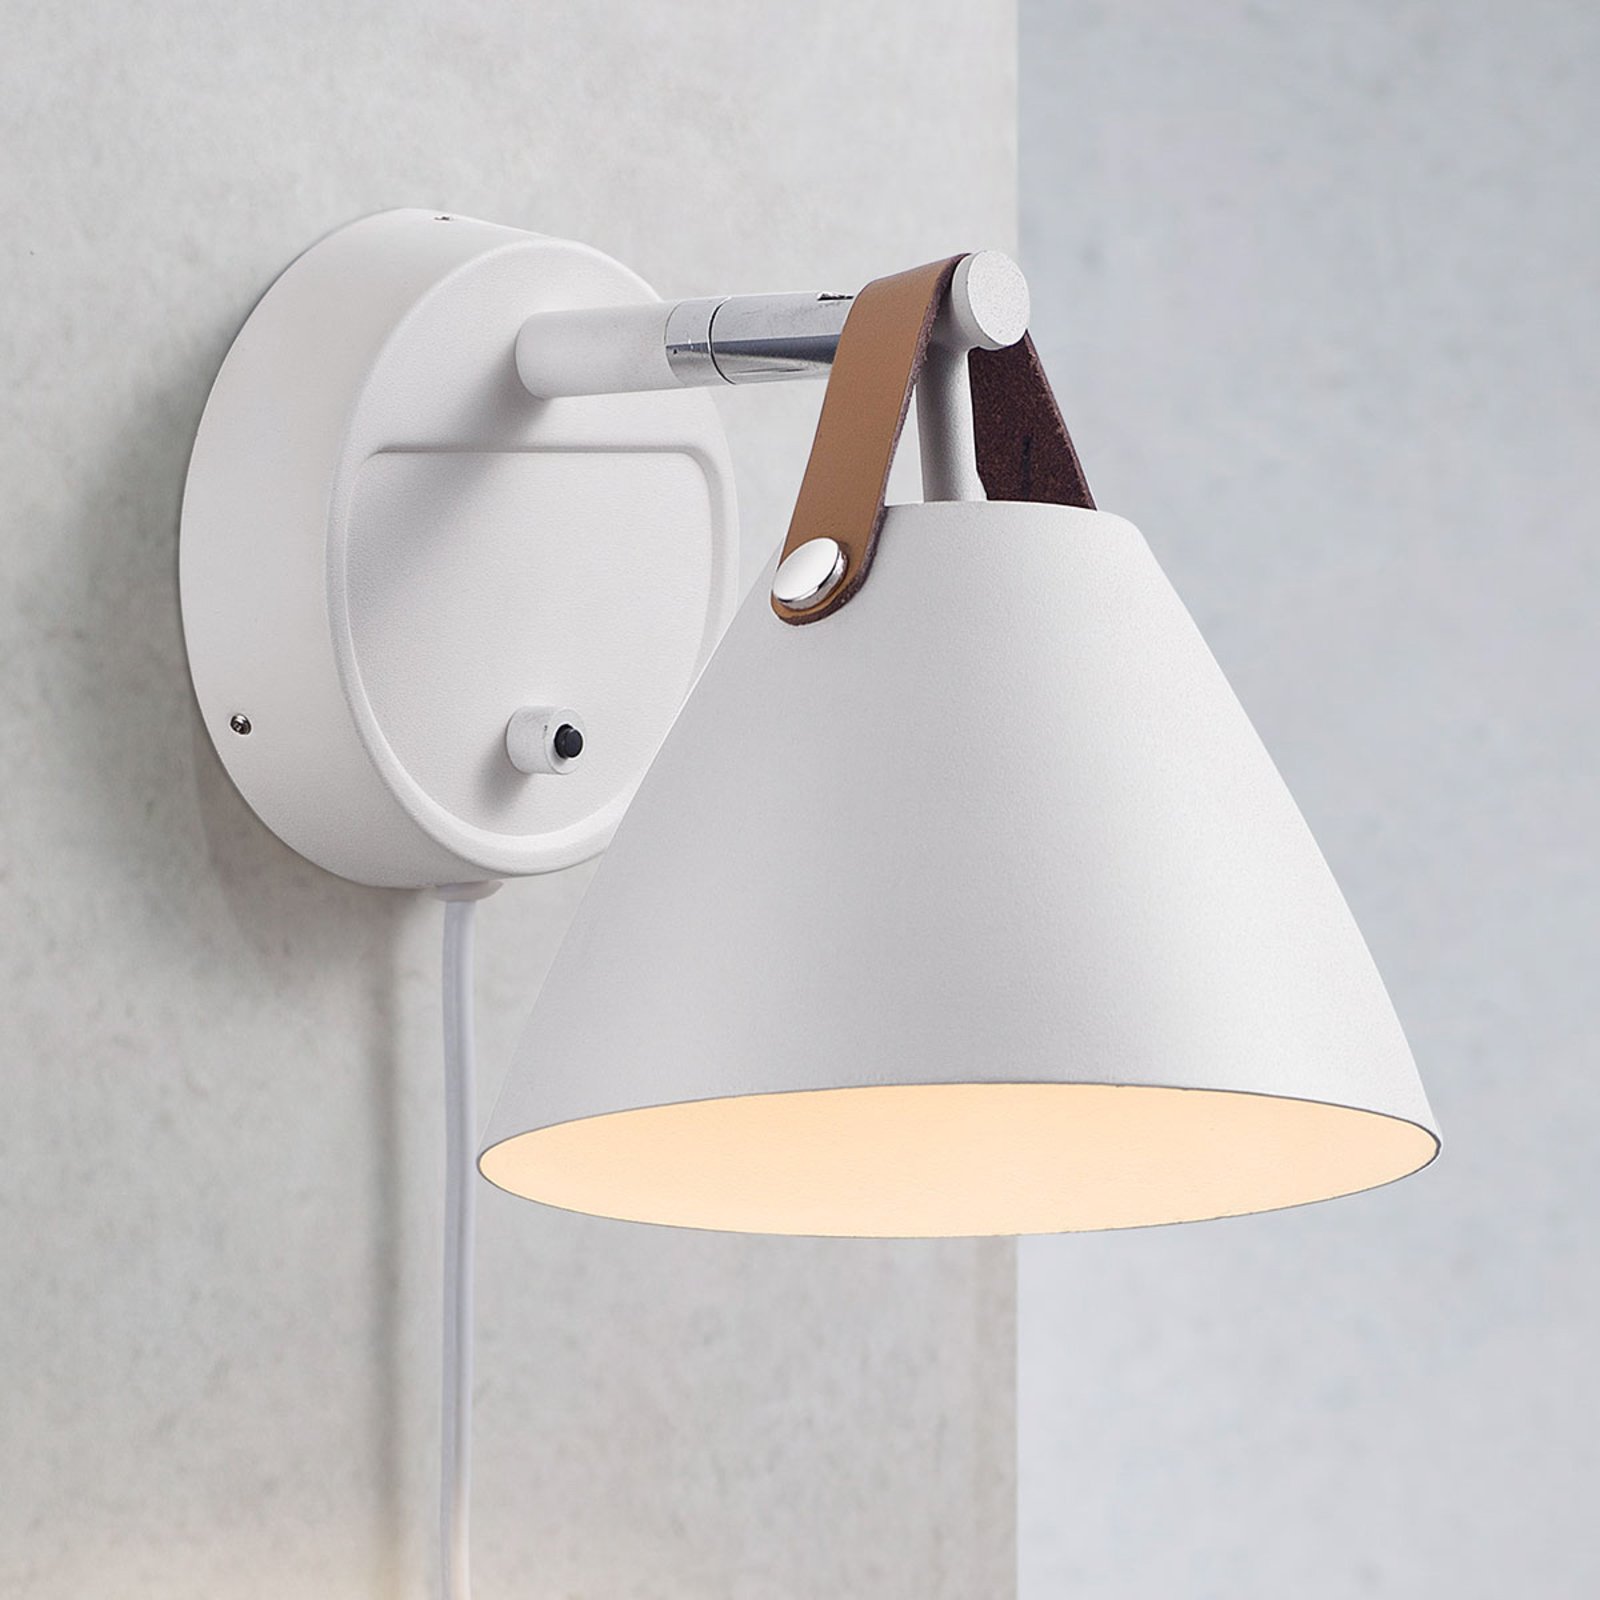 Strap wall light with a leather strap, white